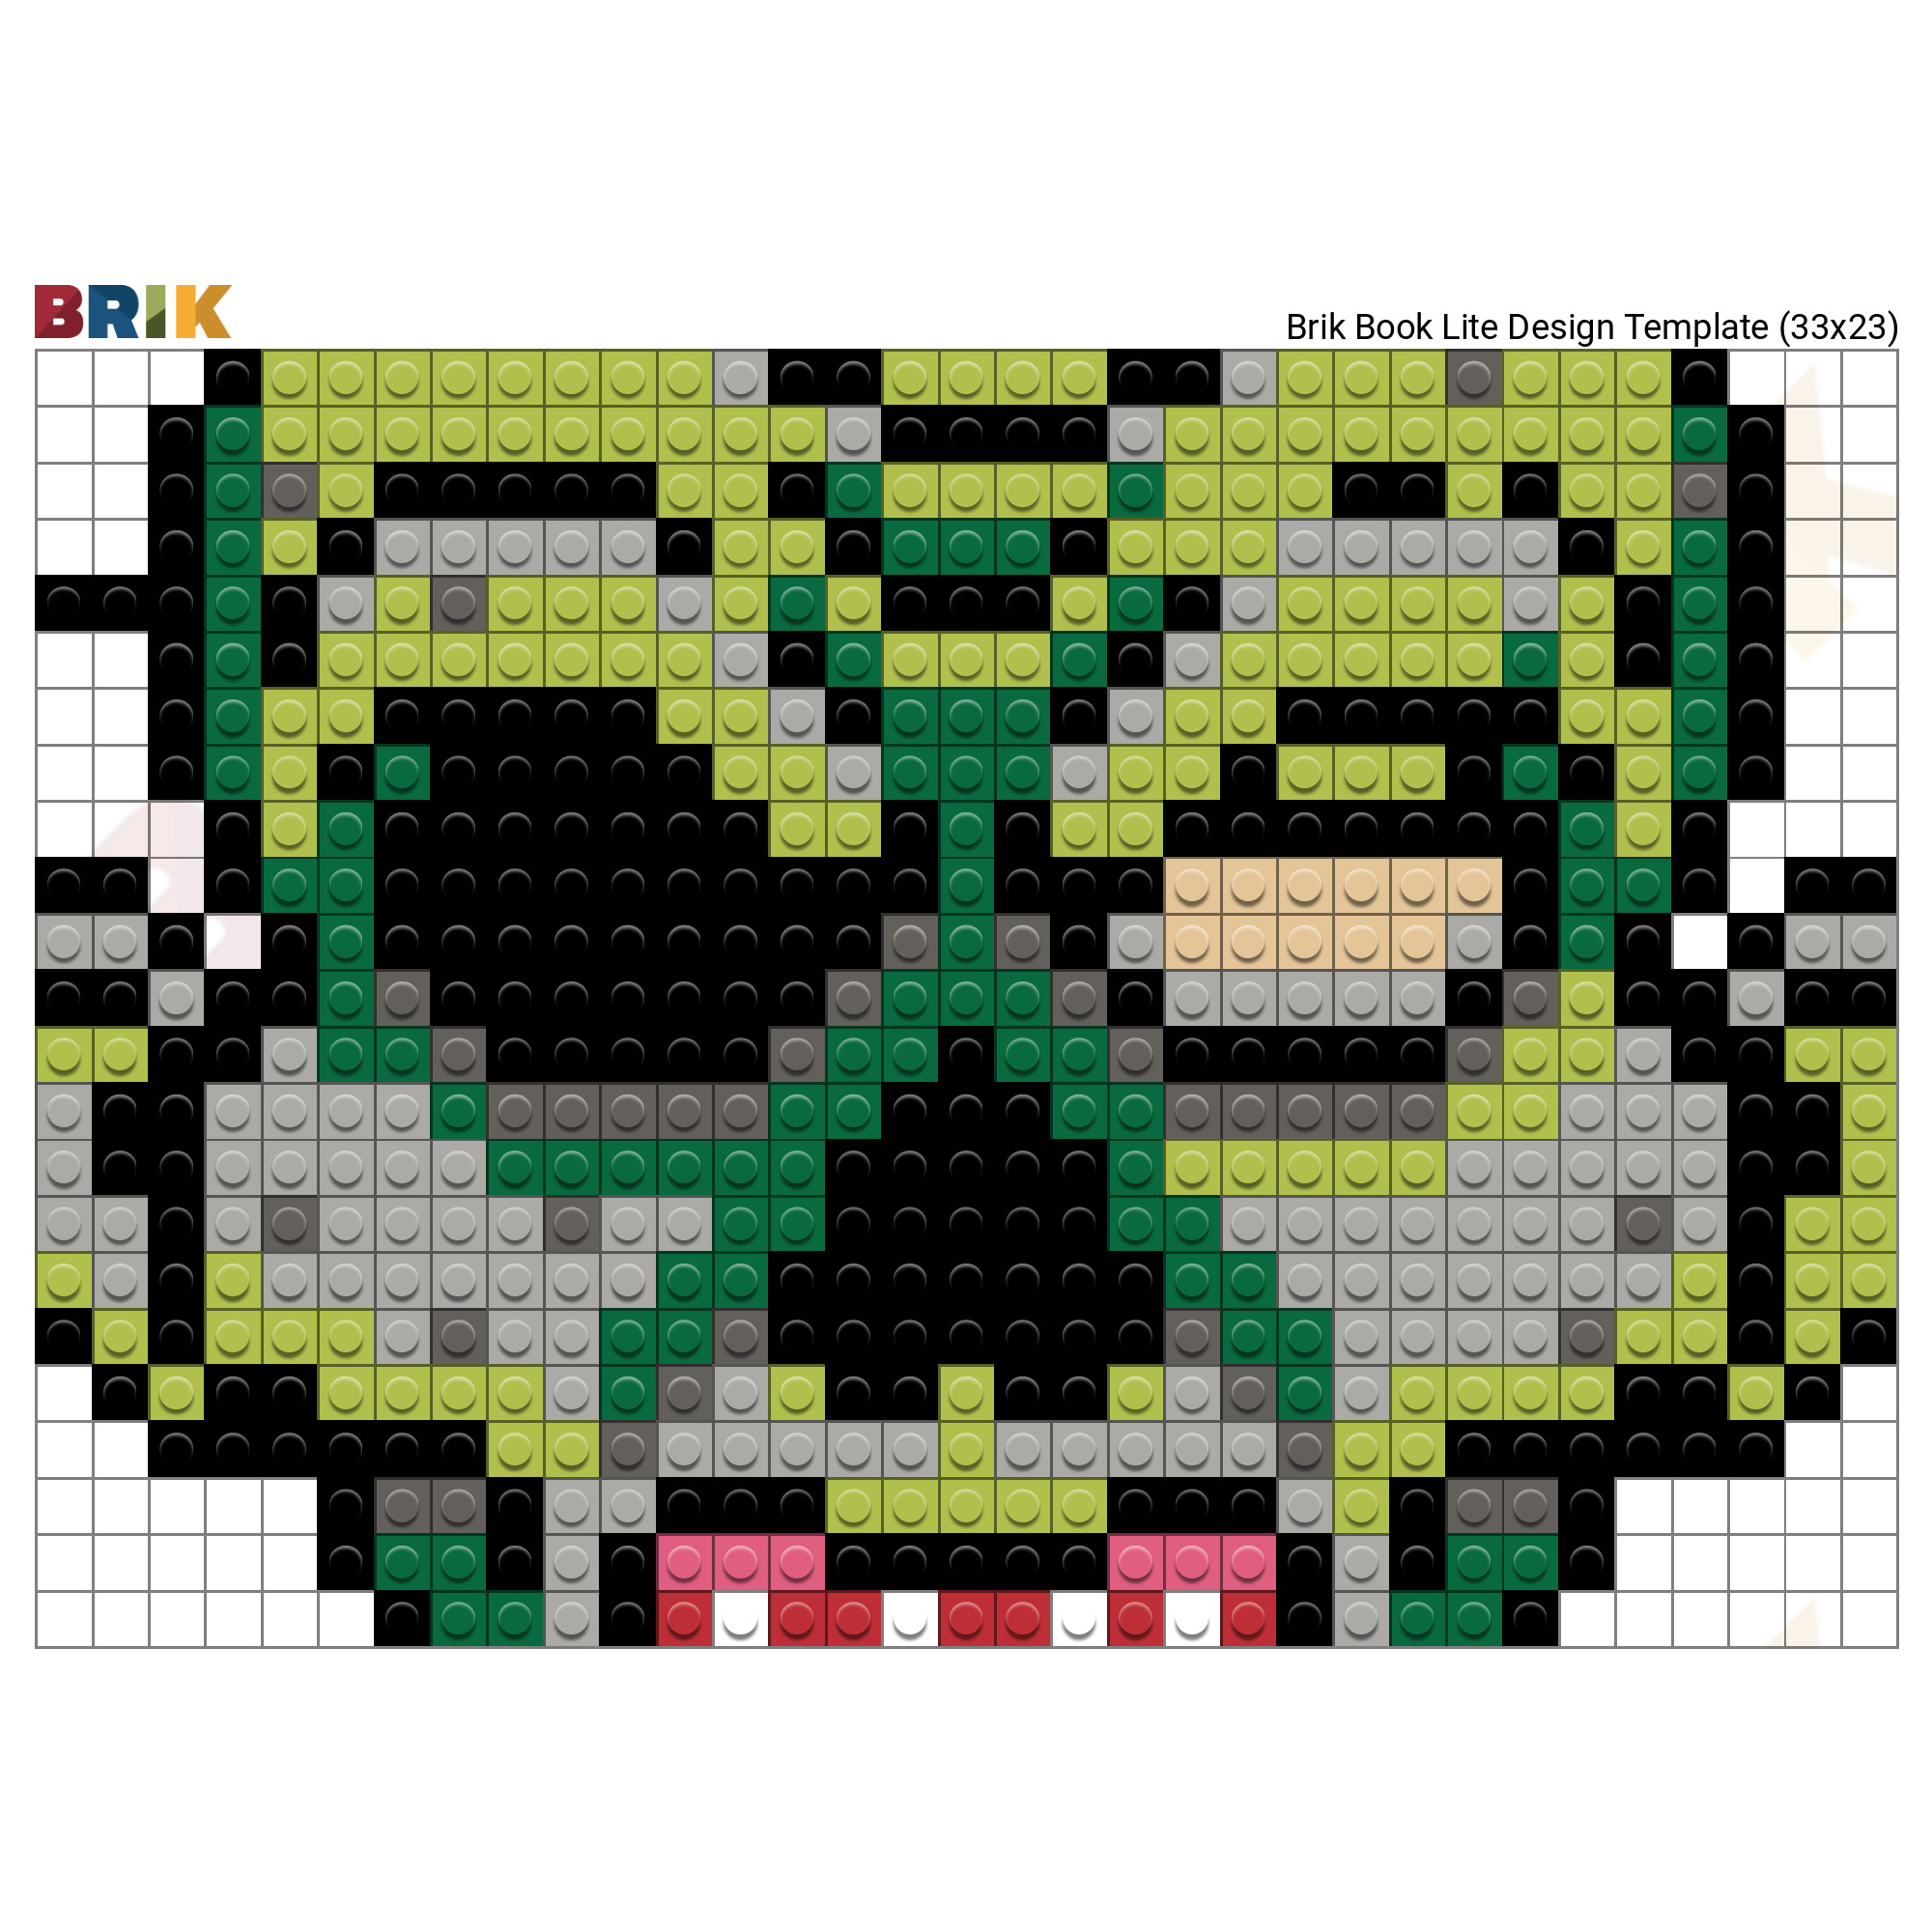 Scary face pixel art